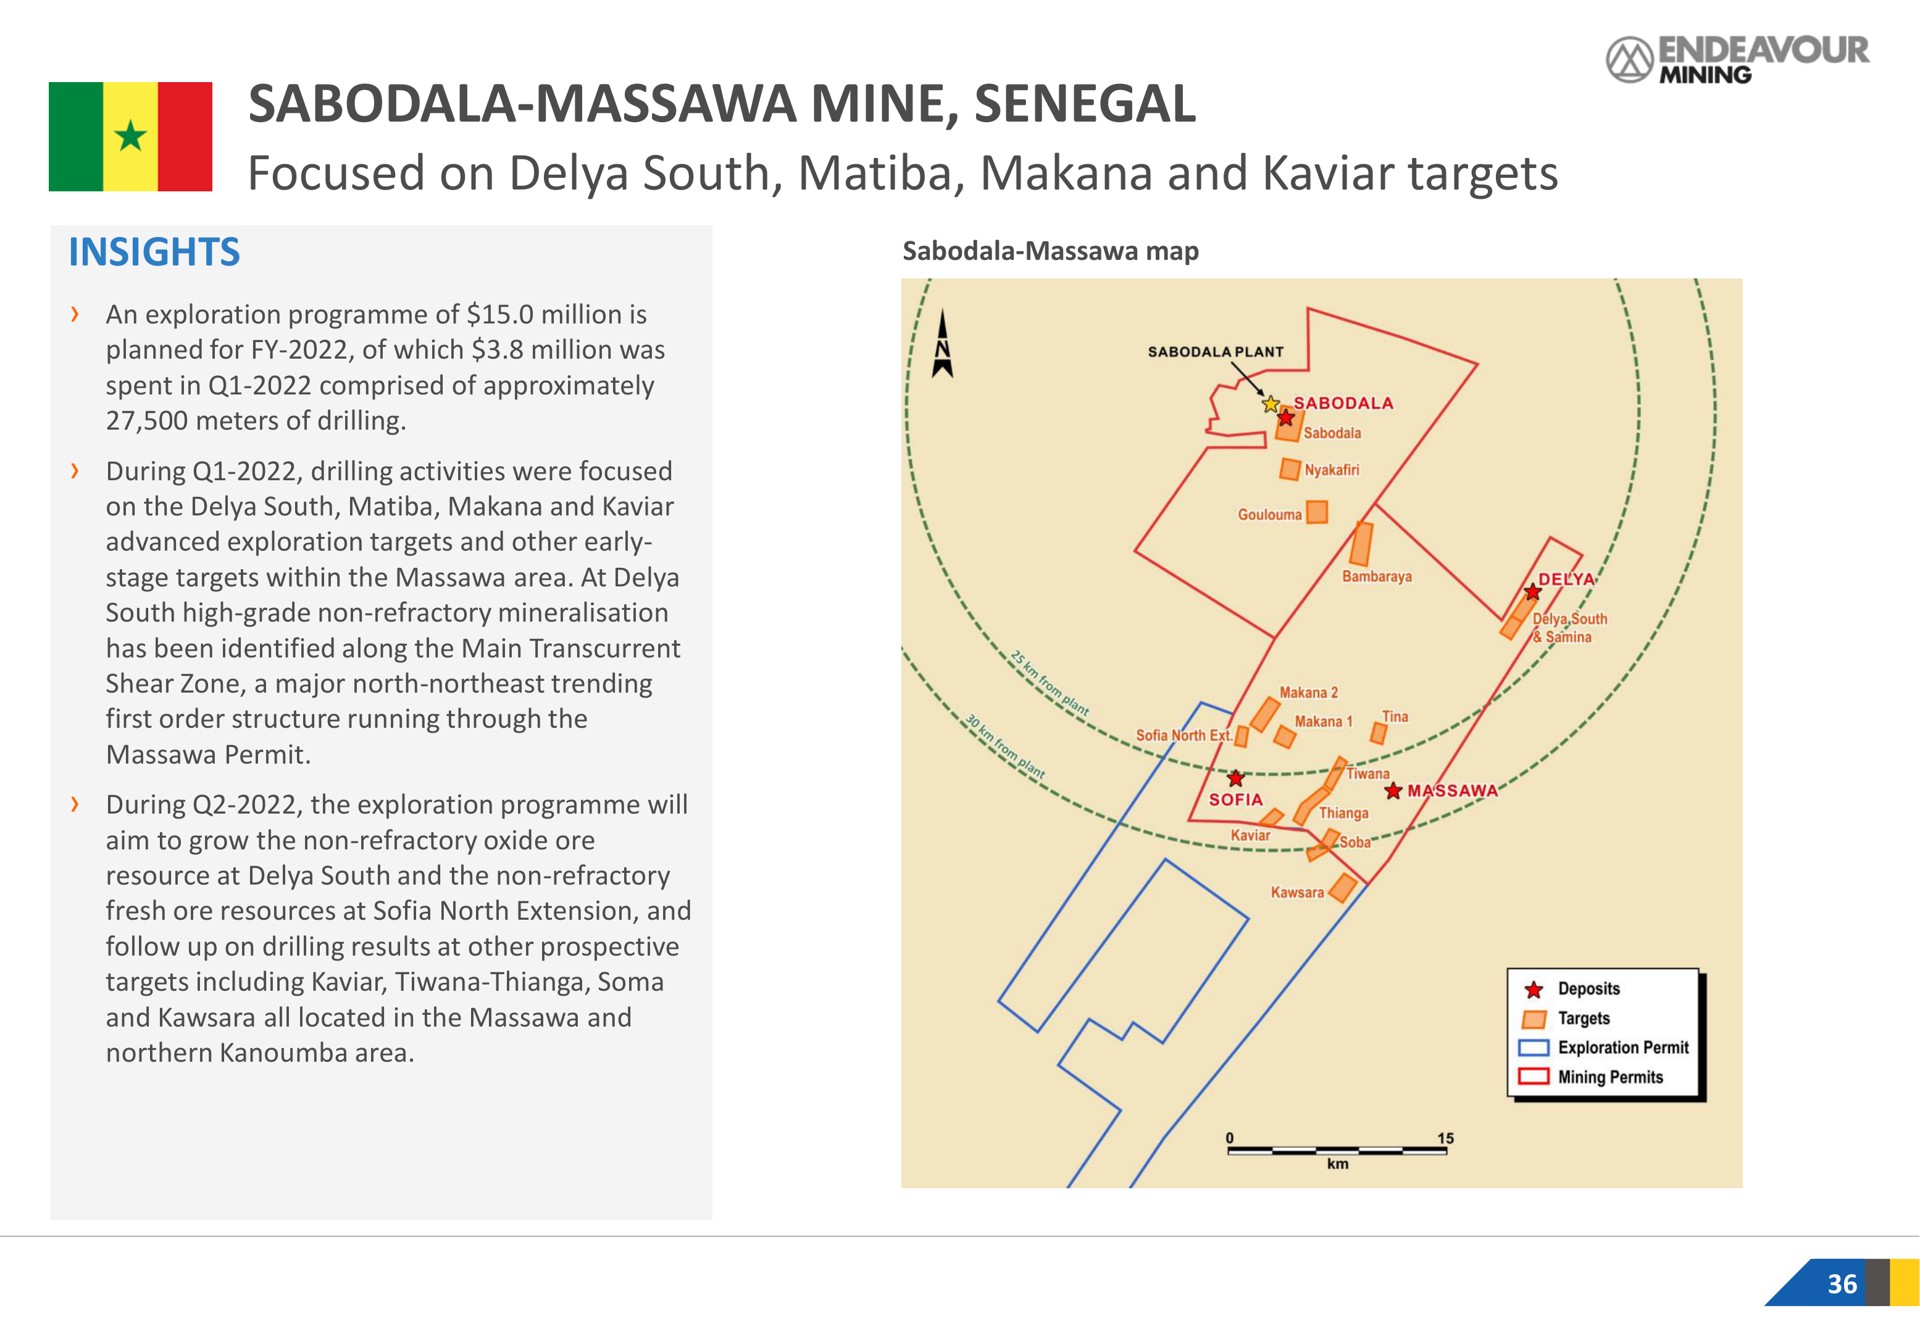 mine focused on south and targets | Endeavour Mining